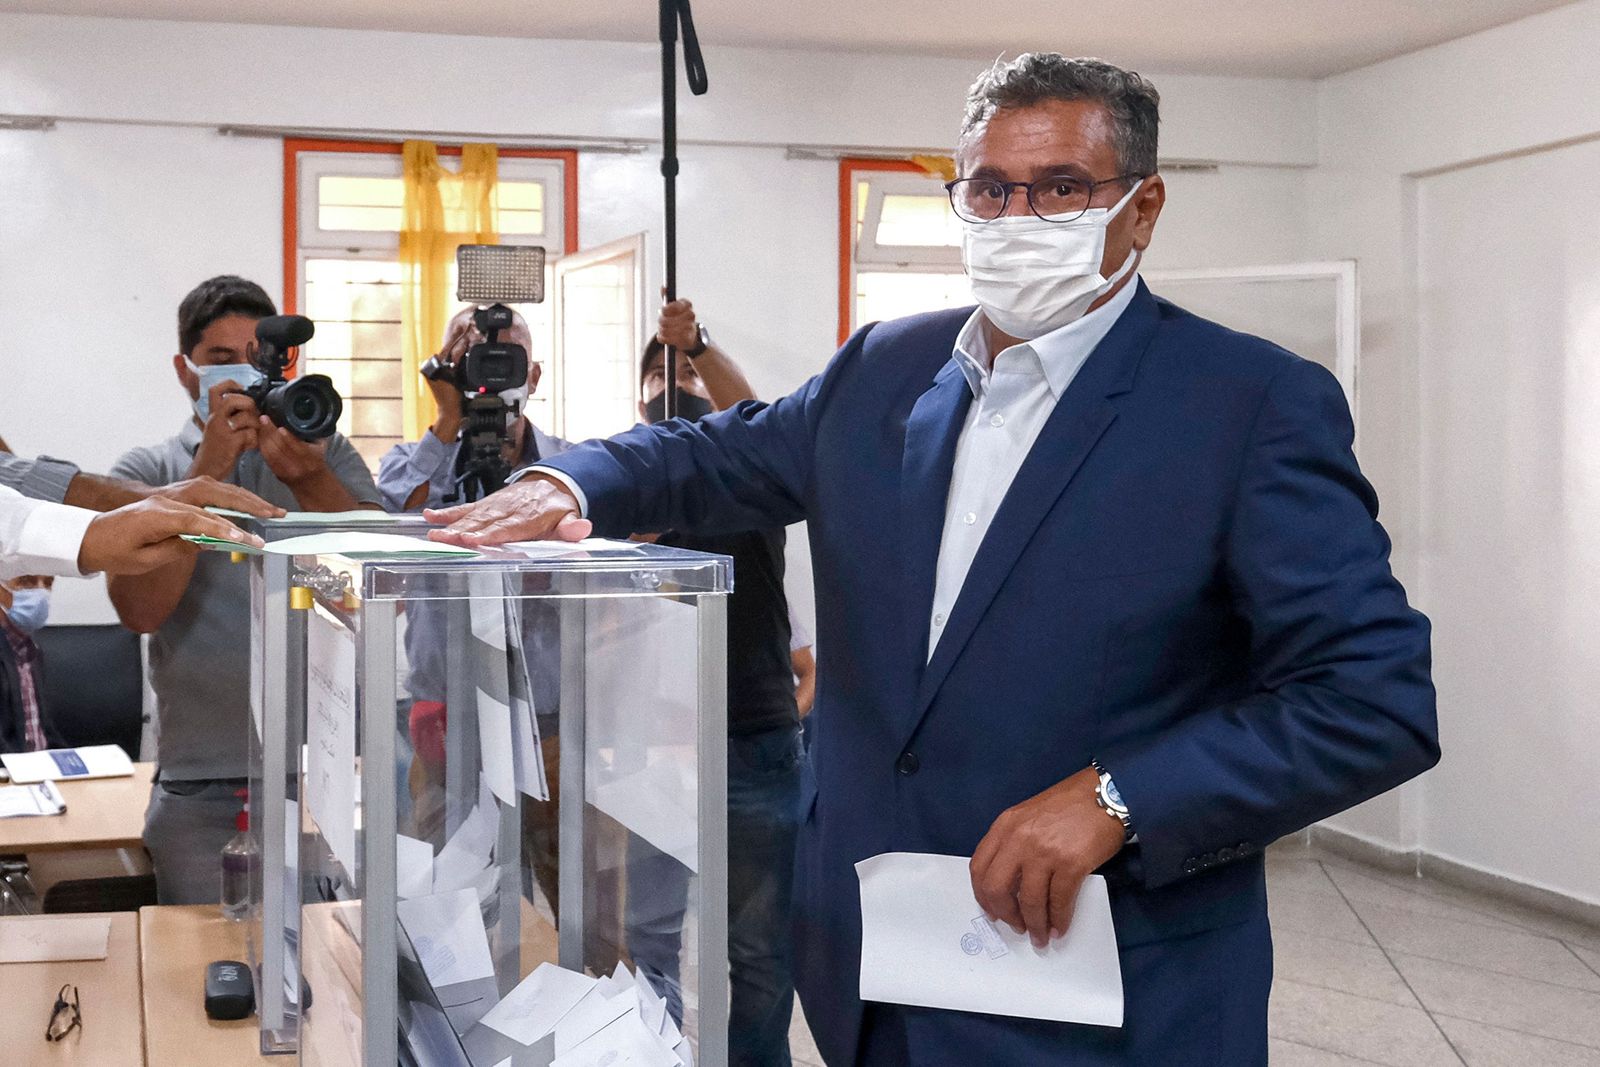 Aziz Akhannouch, president of the National Rally of Independents (RNI), casts his ballot in Agadir on September 8, 2021 as Moroccans vote in parliamentary and local elections. (Photo by STR / AFP) - AFP